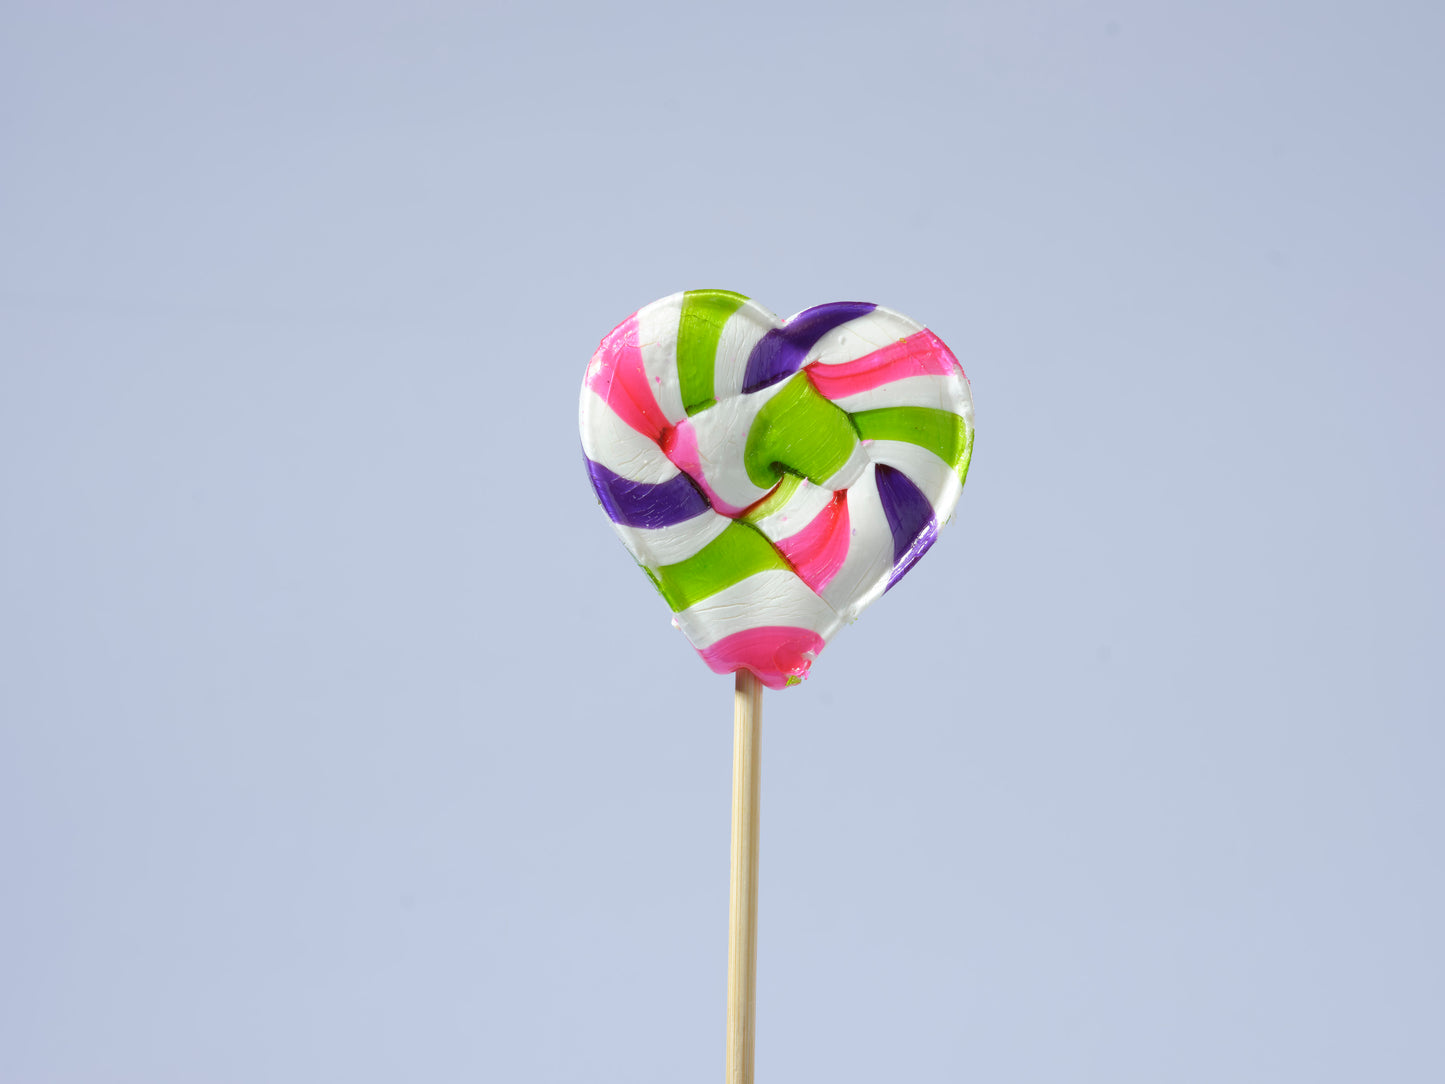 Zubi Swirl Small Lolly (Assorted) - Enriched with Vitamin C